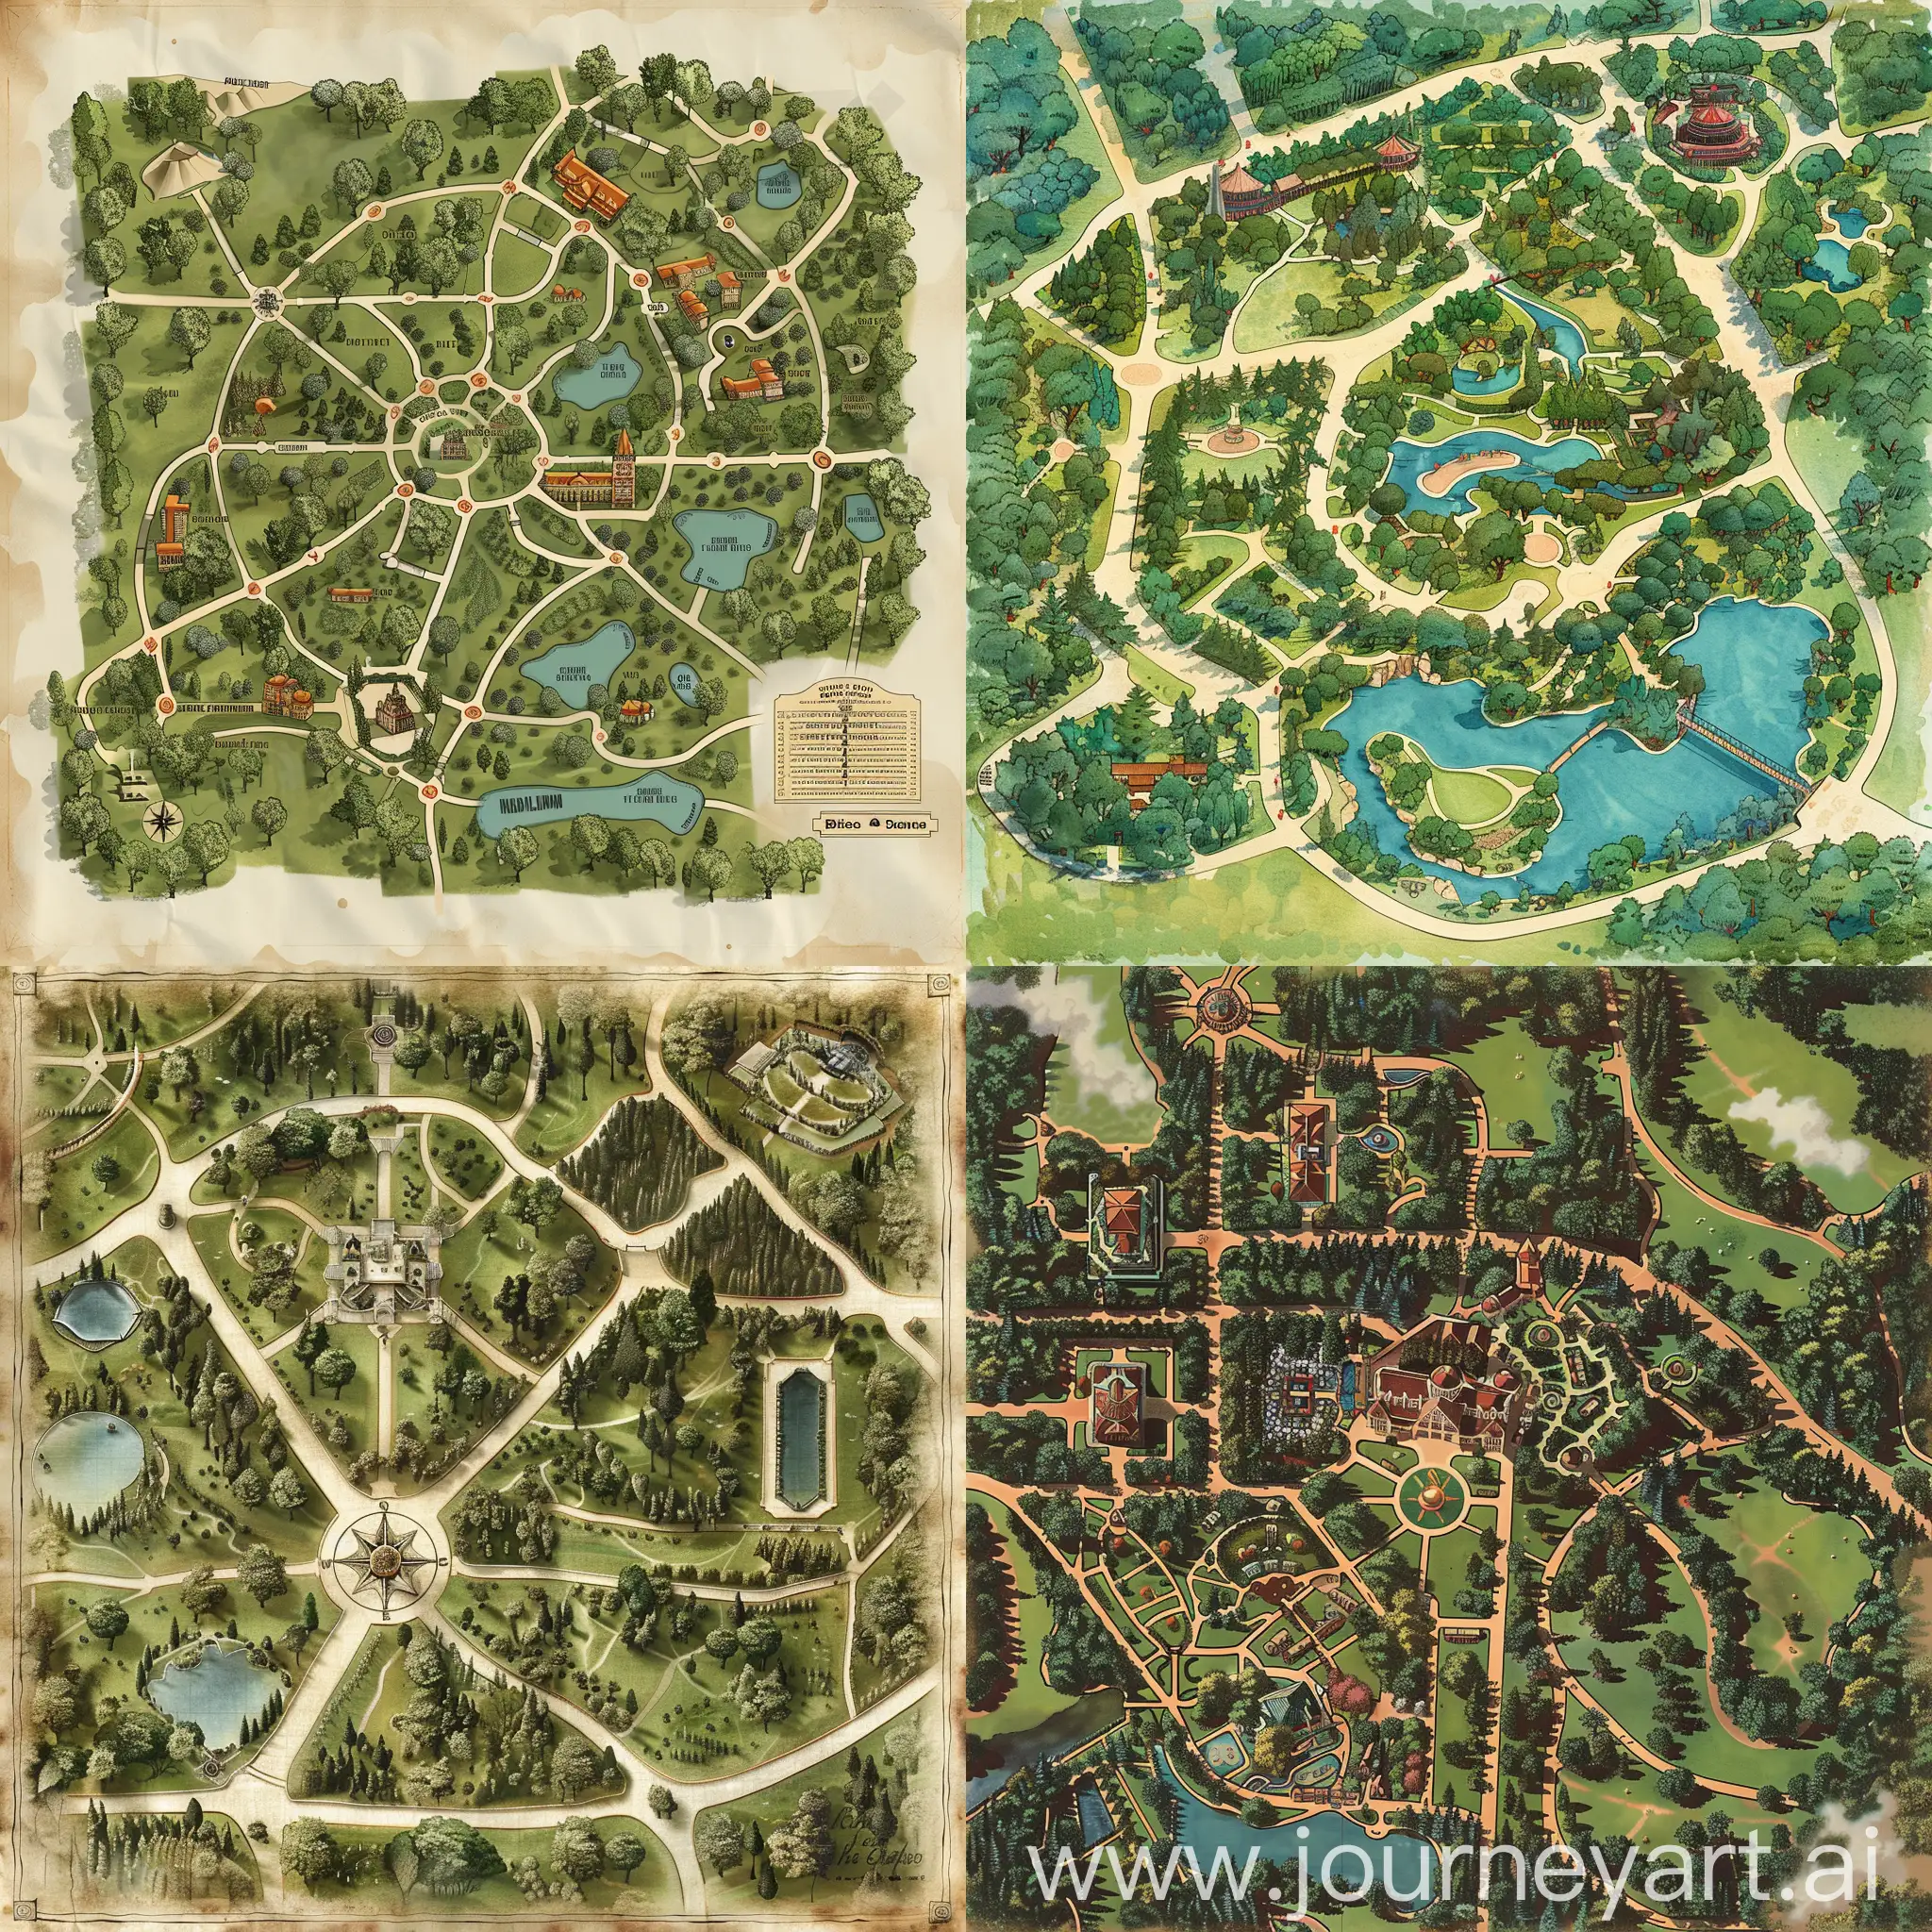 Navigational-Map-of-Park-with-Detailed-Pathways-and-Landmarks